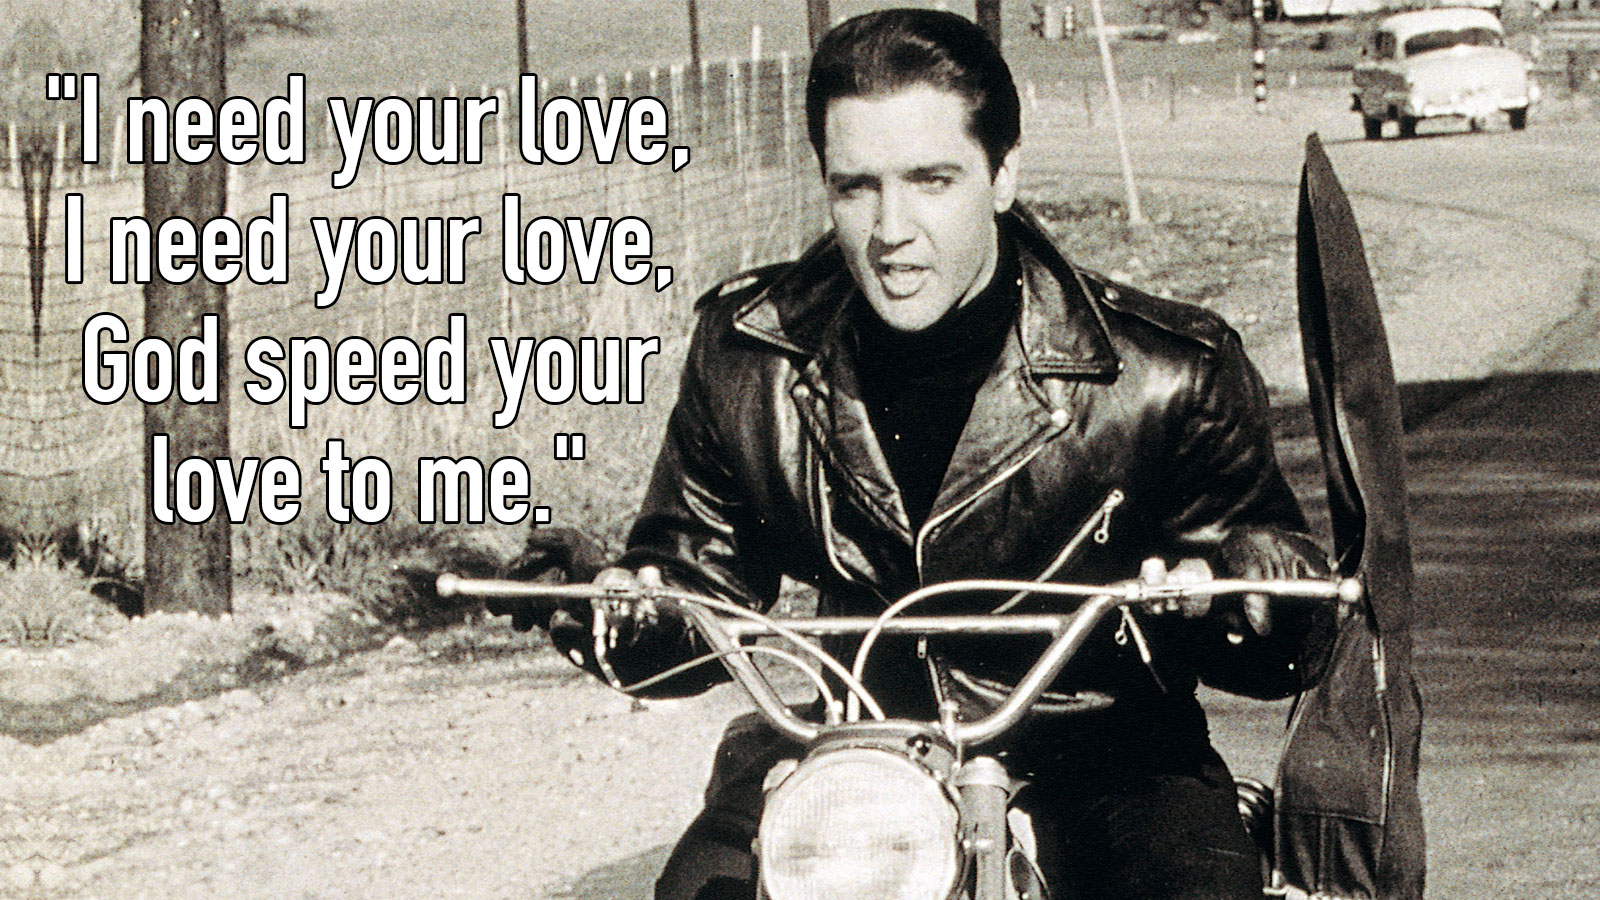 Can You Guess Which Elvis Presley Song This Lyric Is From? 151